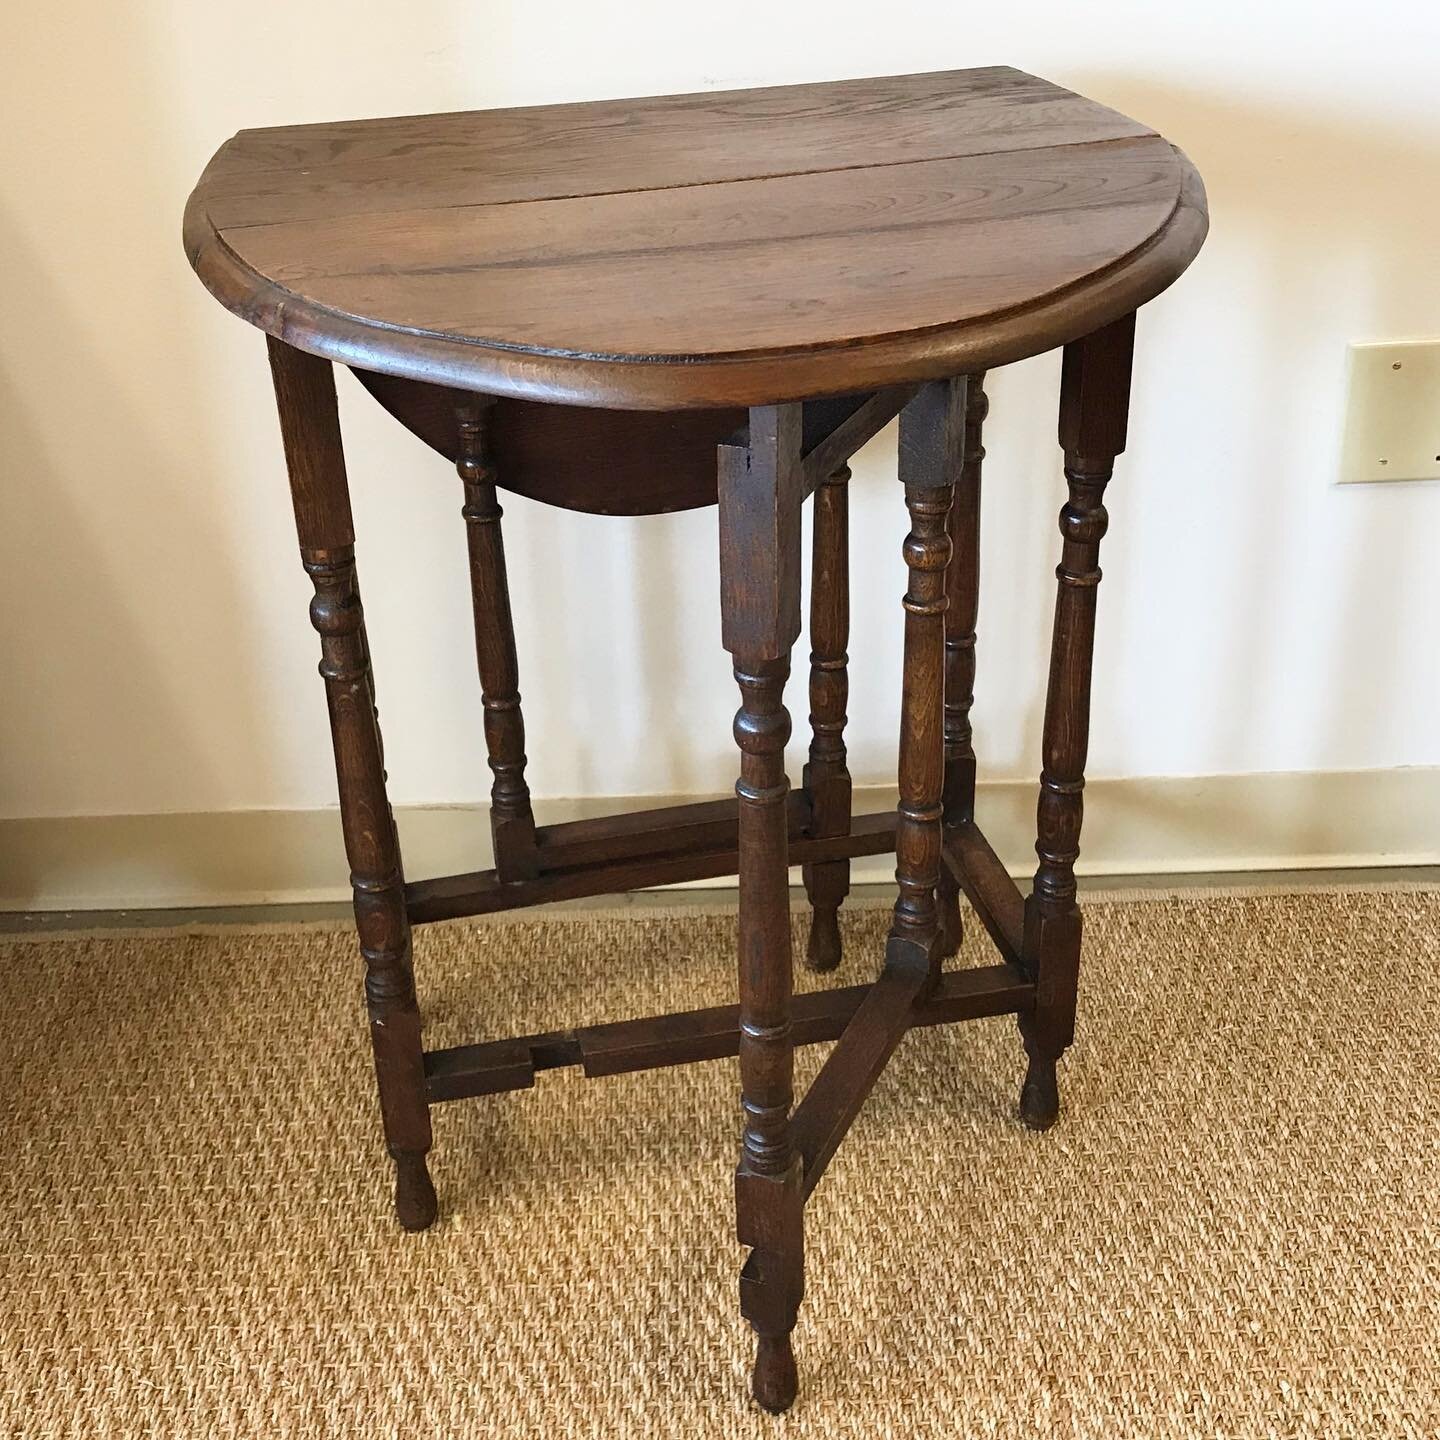 💕Love this little Antique Gate Leg Table&hellip;Perfect for any room in the house. It can be opened up on both sides, opened on one side or both sides dropped down depending on space constraints or usage.  #antiques #antiquedealersofinstagram #gatel